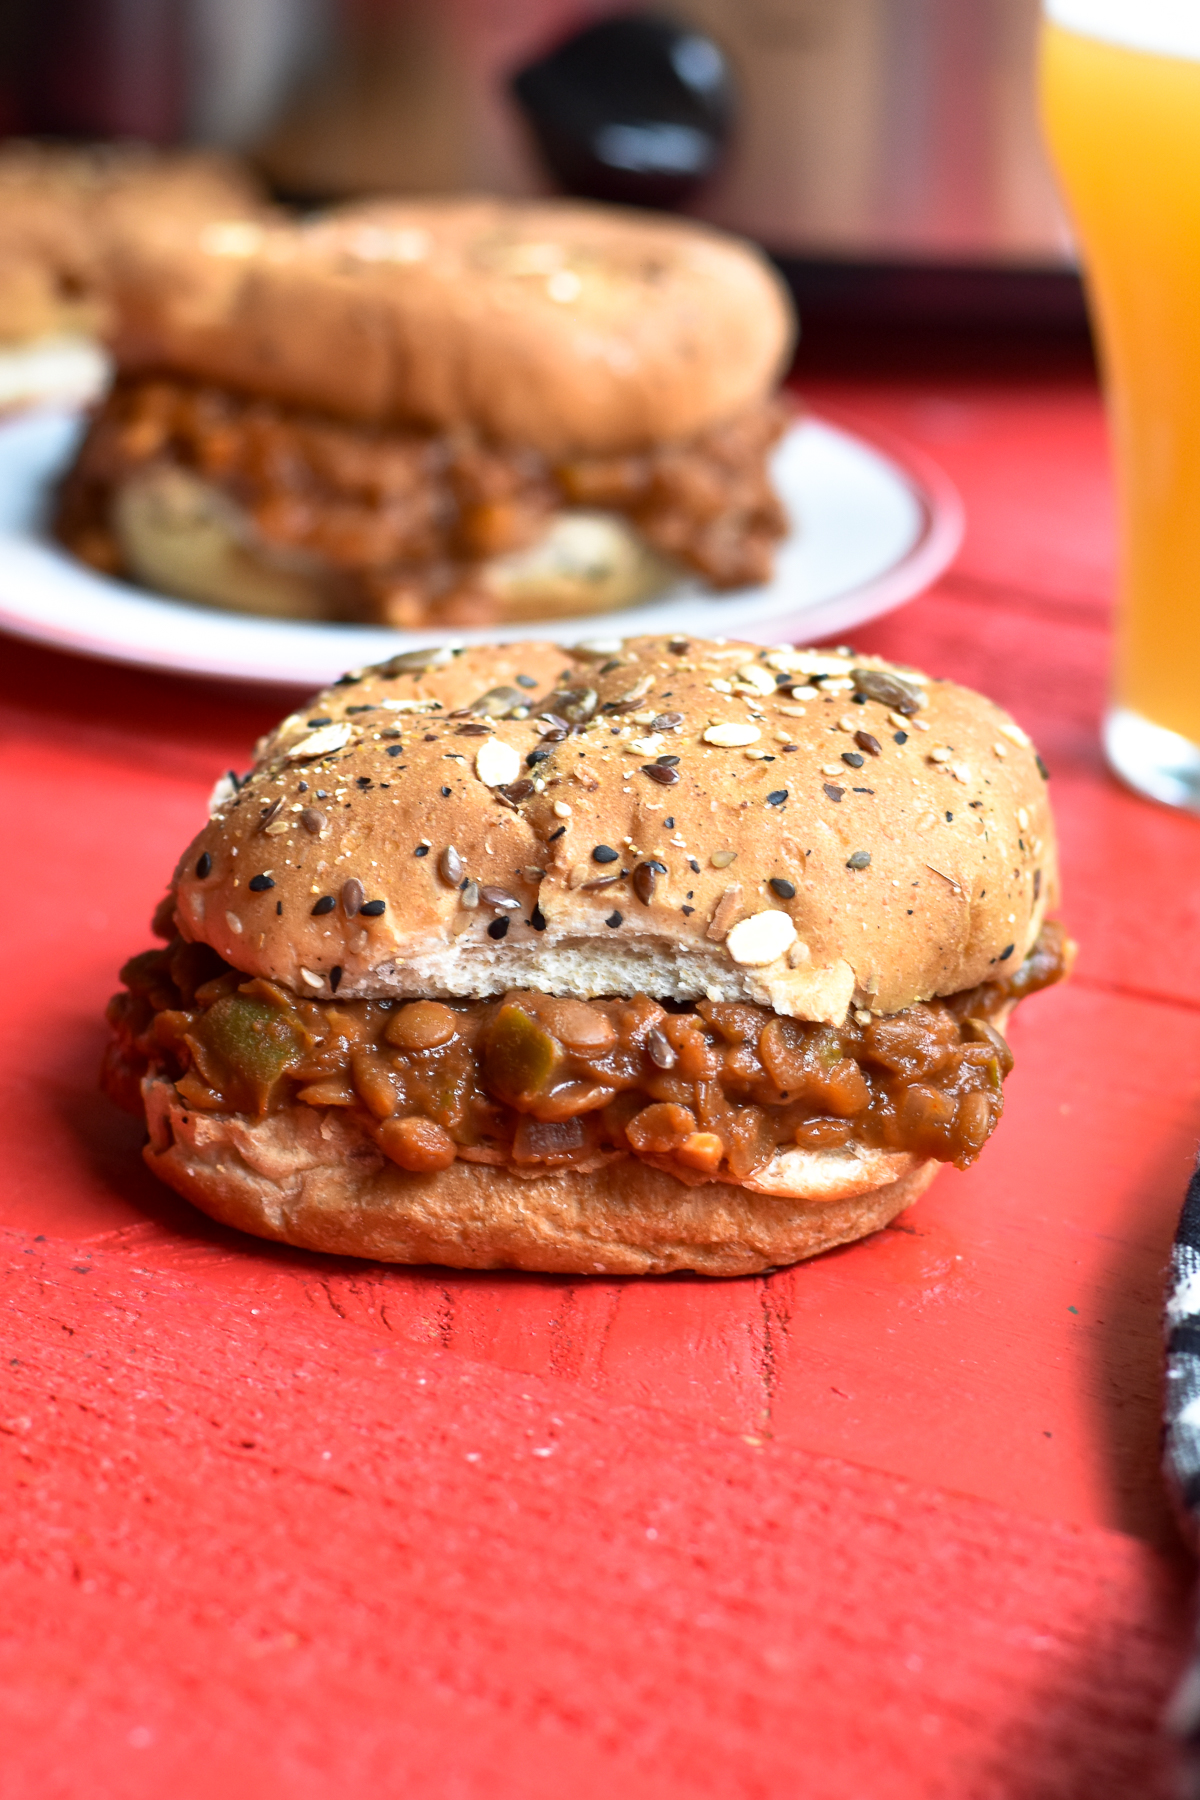 This recipe for Lentil Sloppy Joes couldn't be easier to make. The slow cooker does all the work for you, making this recipe perfect for an easy dinner. This plant-based spin on the classic sloppy joe is a crowd pleaser that won't break the bank! #vegan #vegetarian #sloppyjoes #Lentils #slowcooker #crockpot